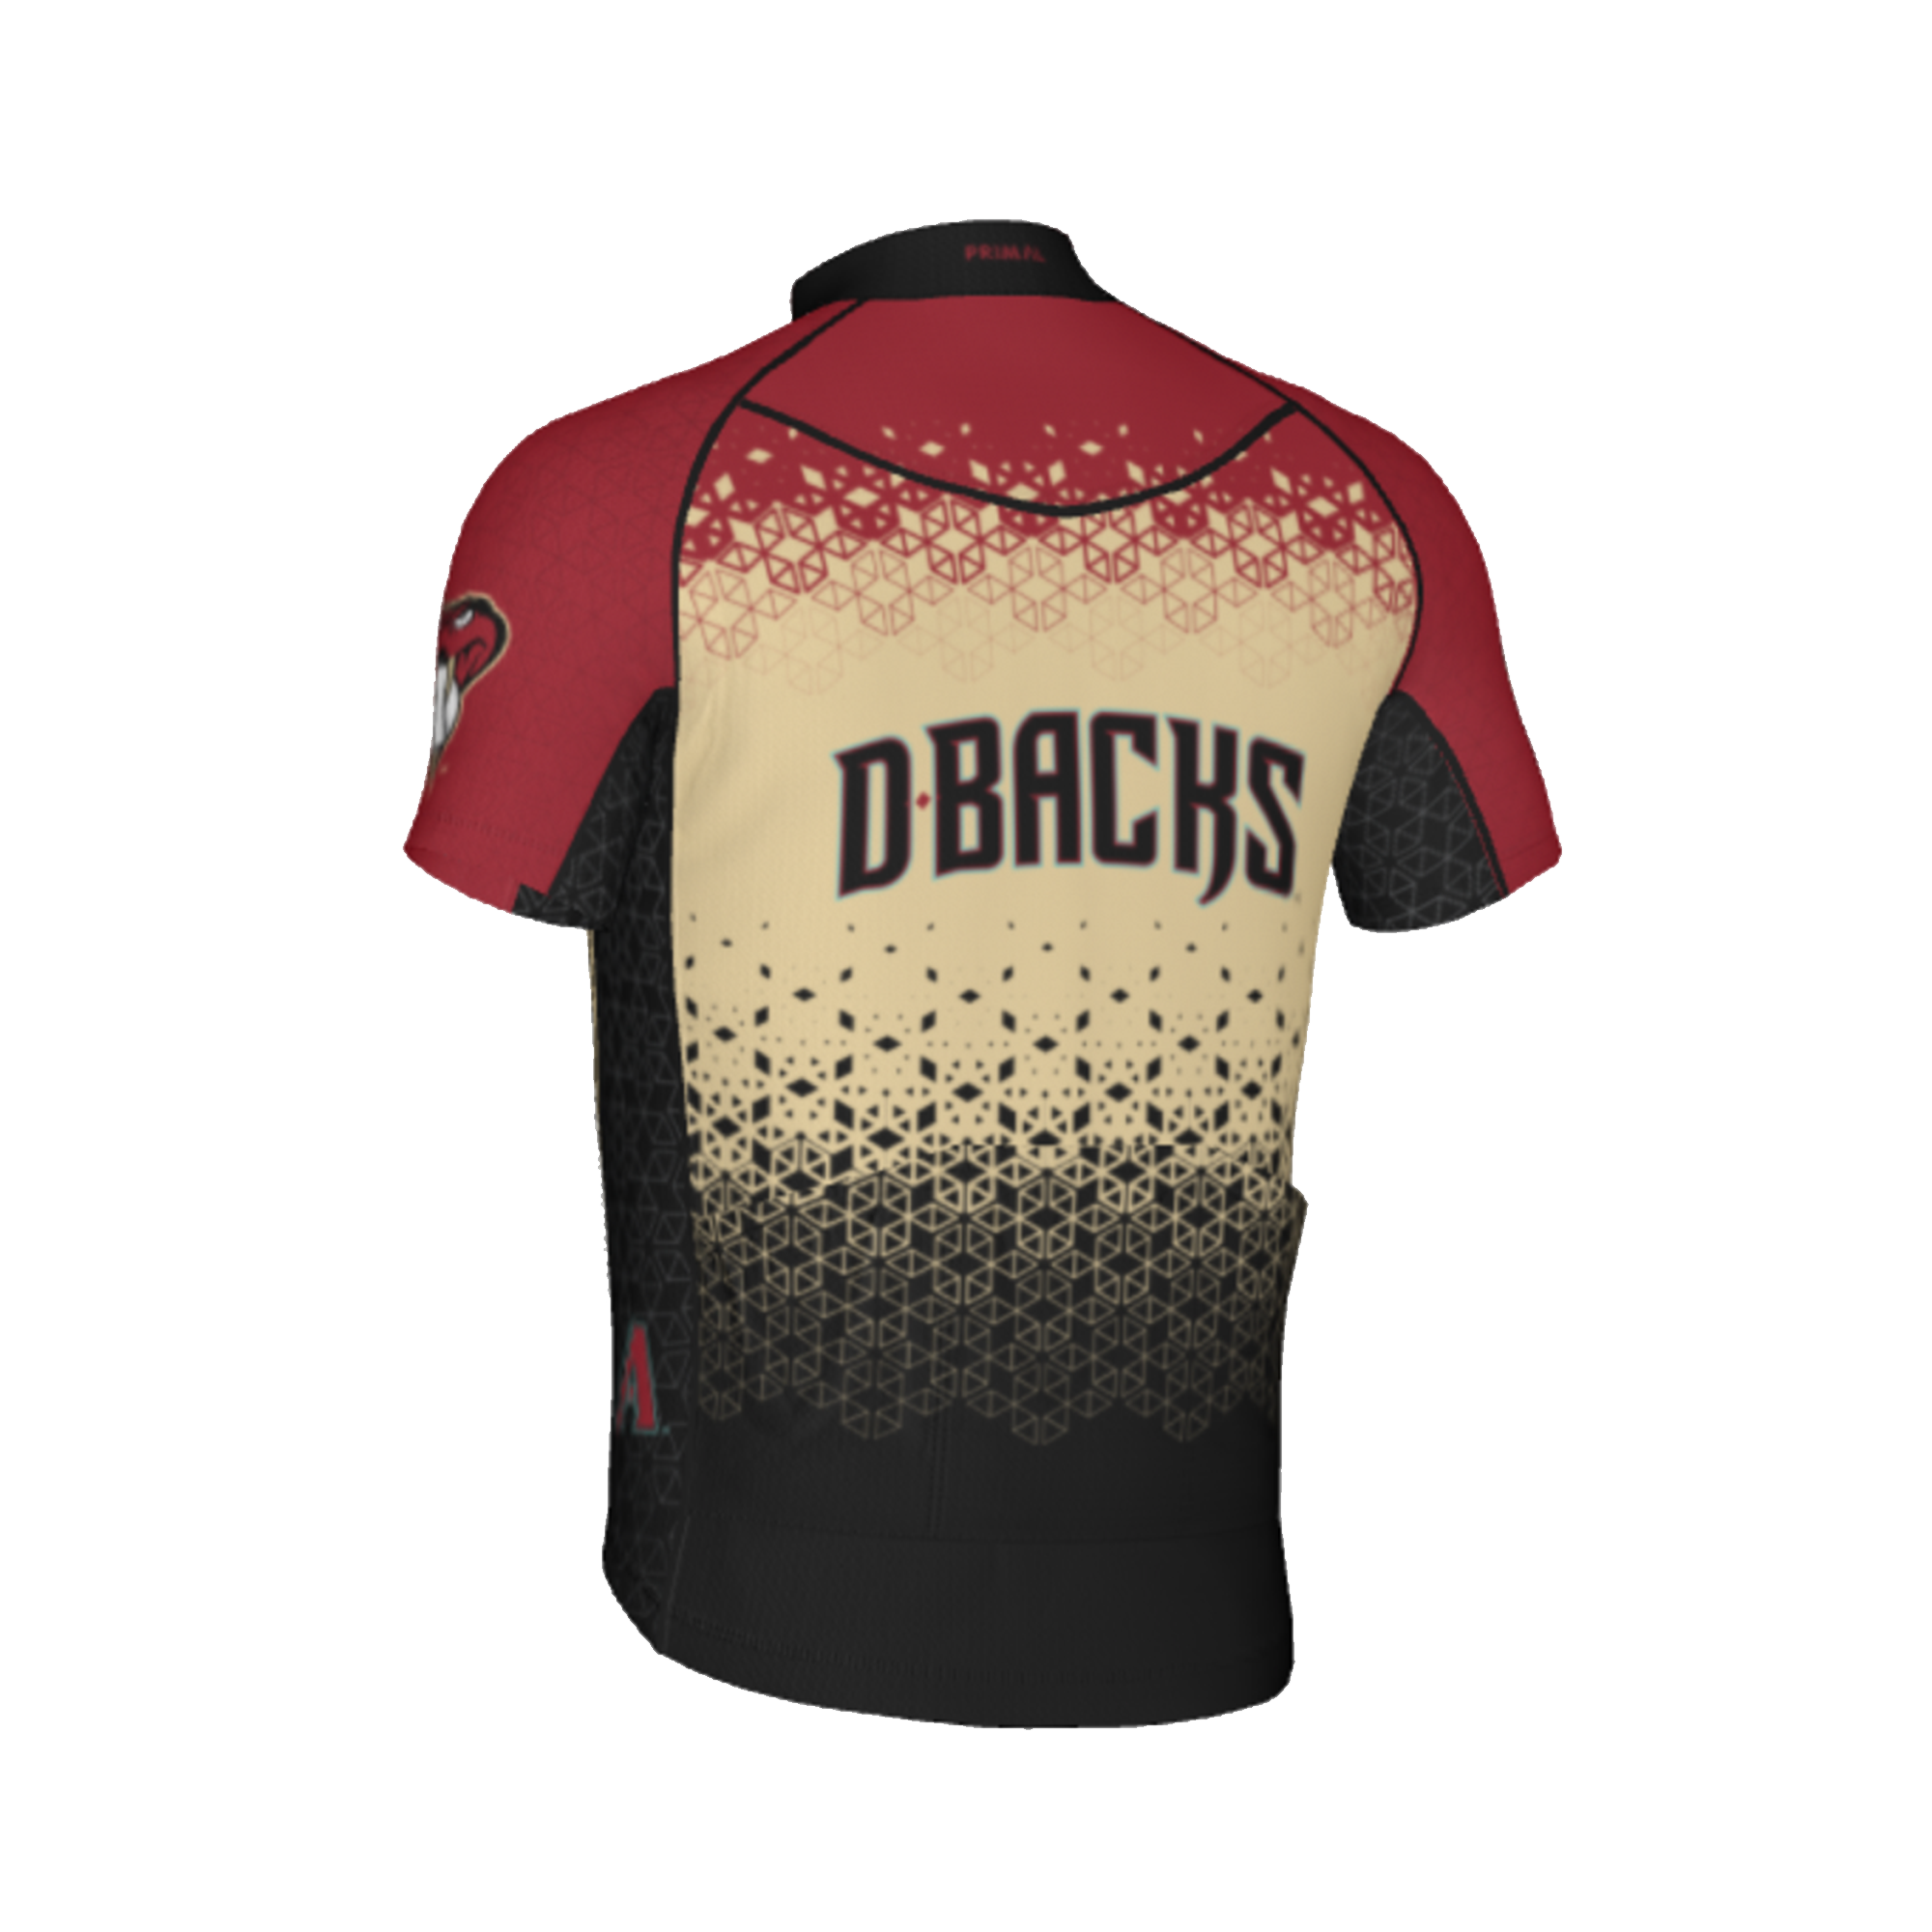 Buy dbacks shirt - OFF-66% > Free Delivery